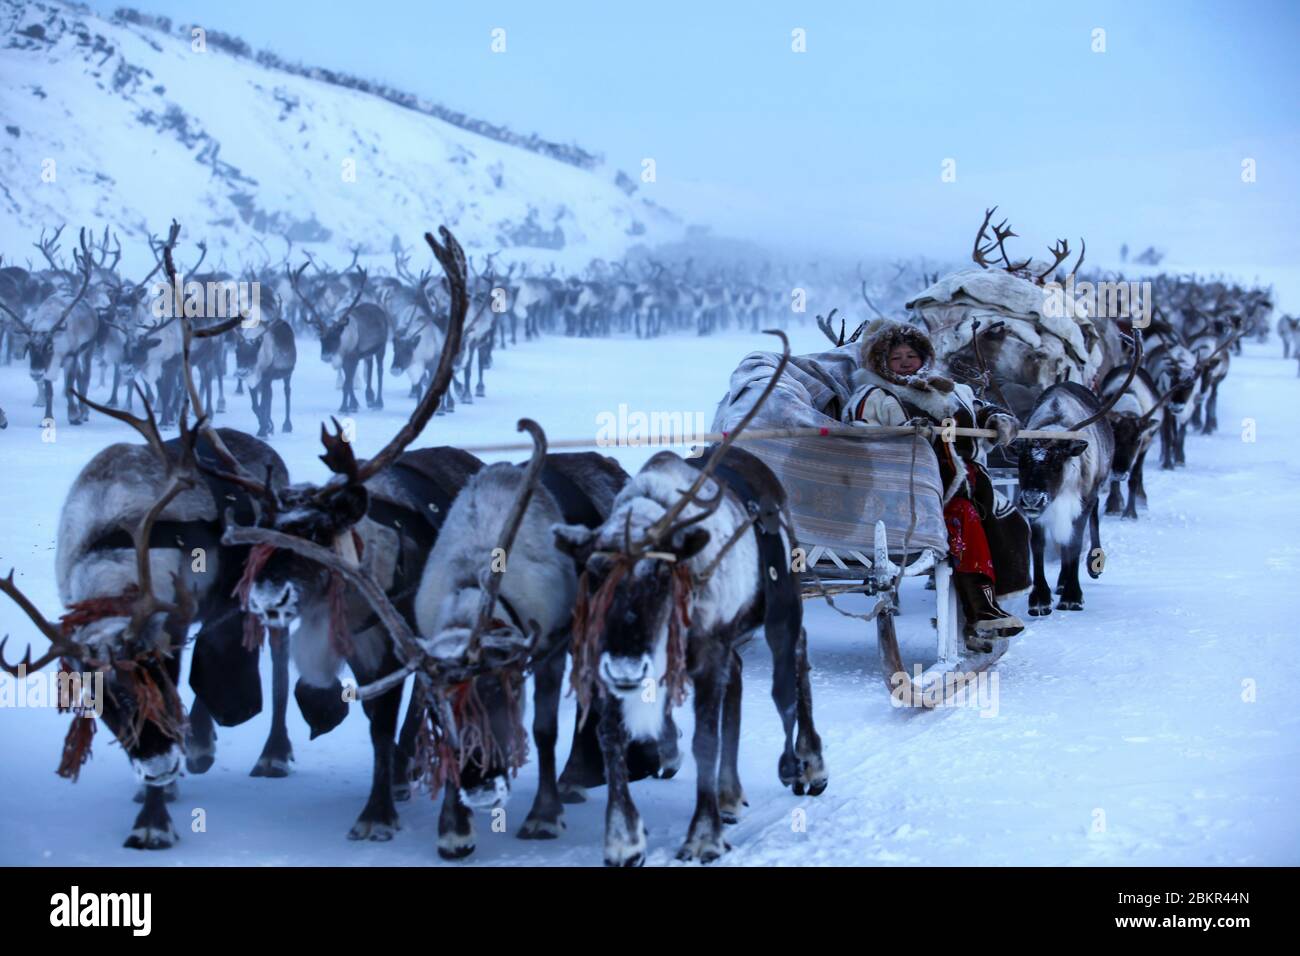 Russia, Siberia, migration of Nenetses and their reindeer herds Stock Photo